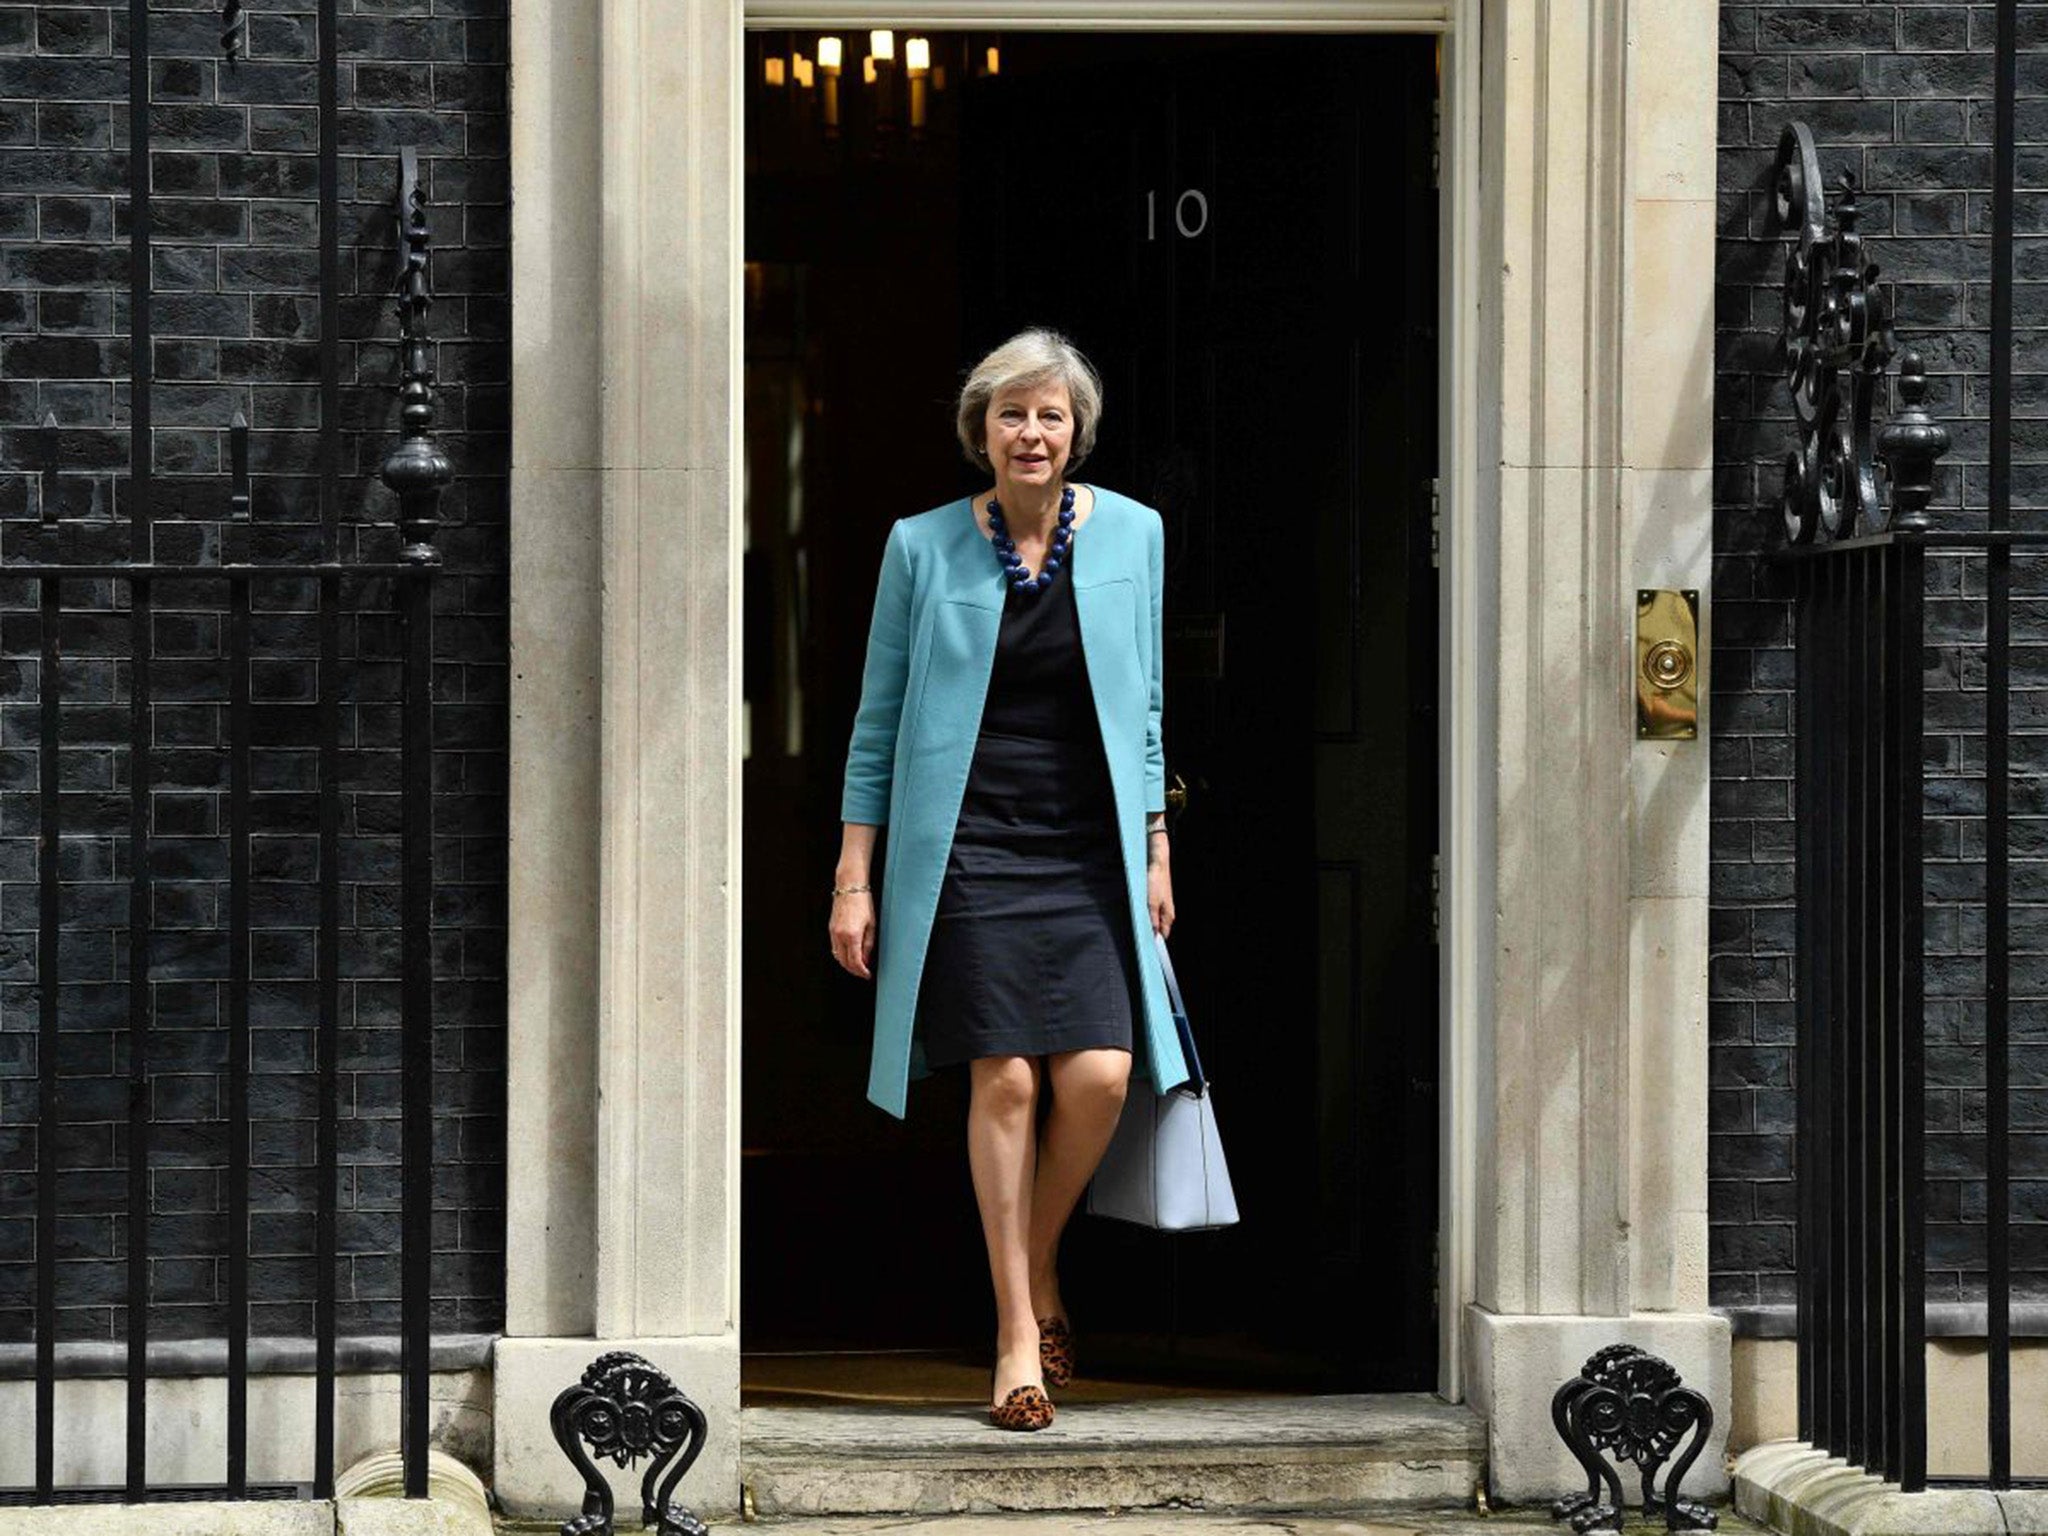 Theresa May will be Britain's new Prime Minister